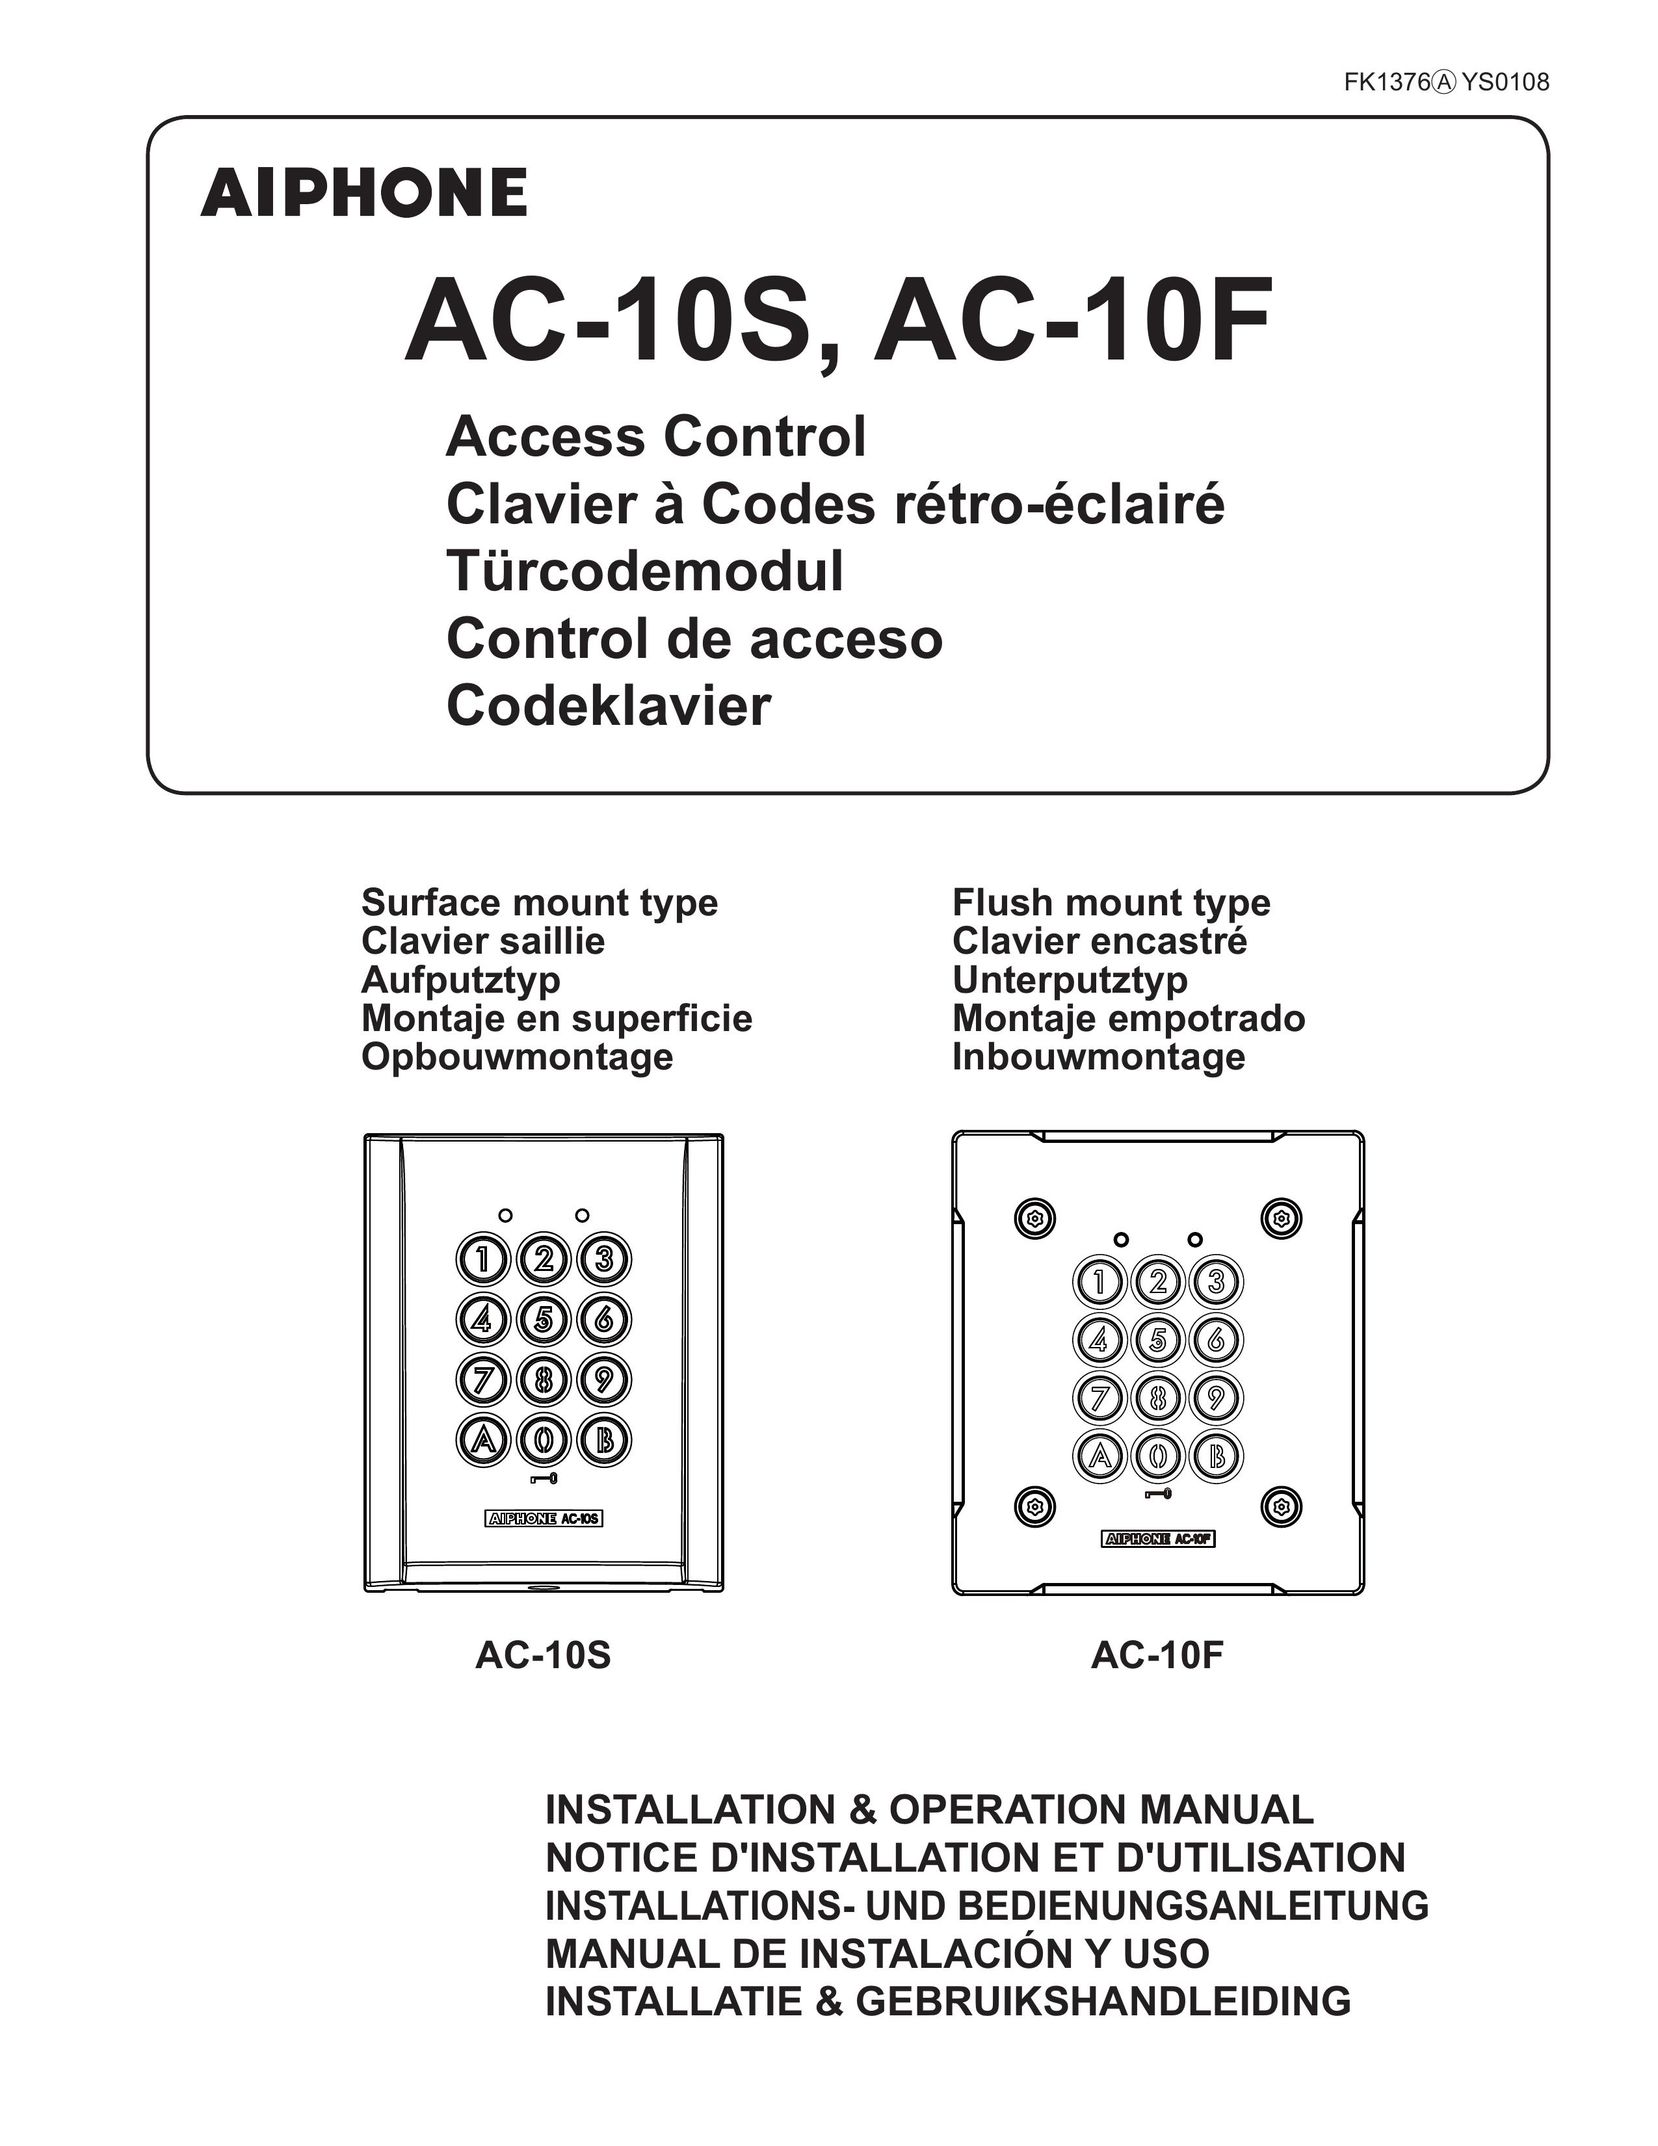 Aiphone AC-10S Home Security System User Manual